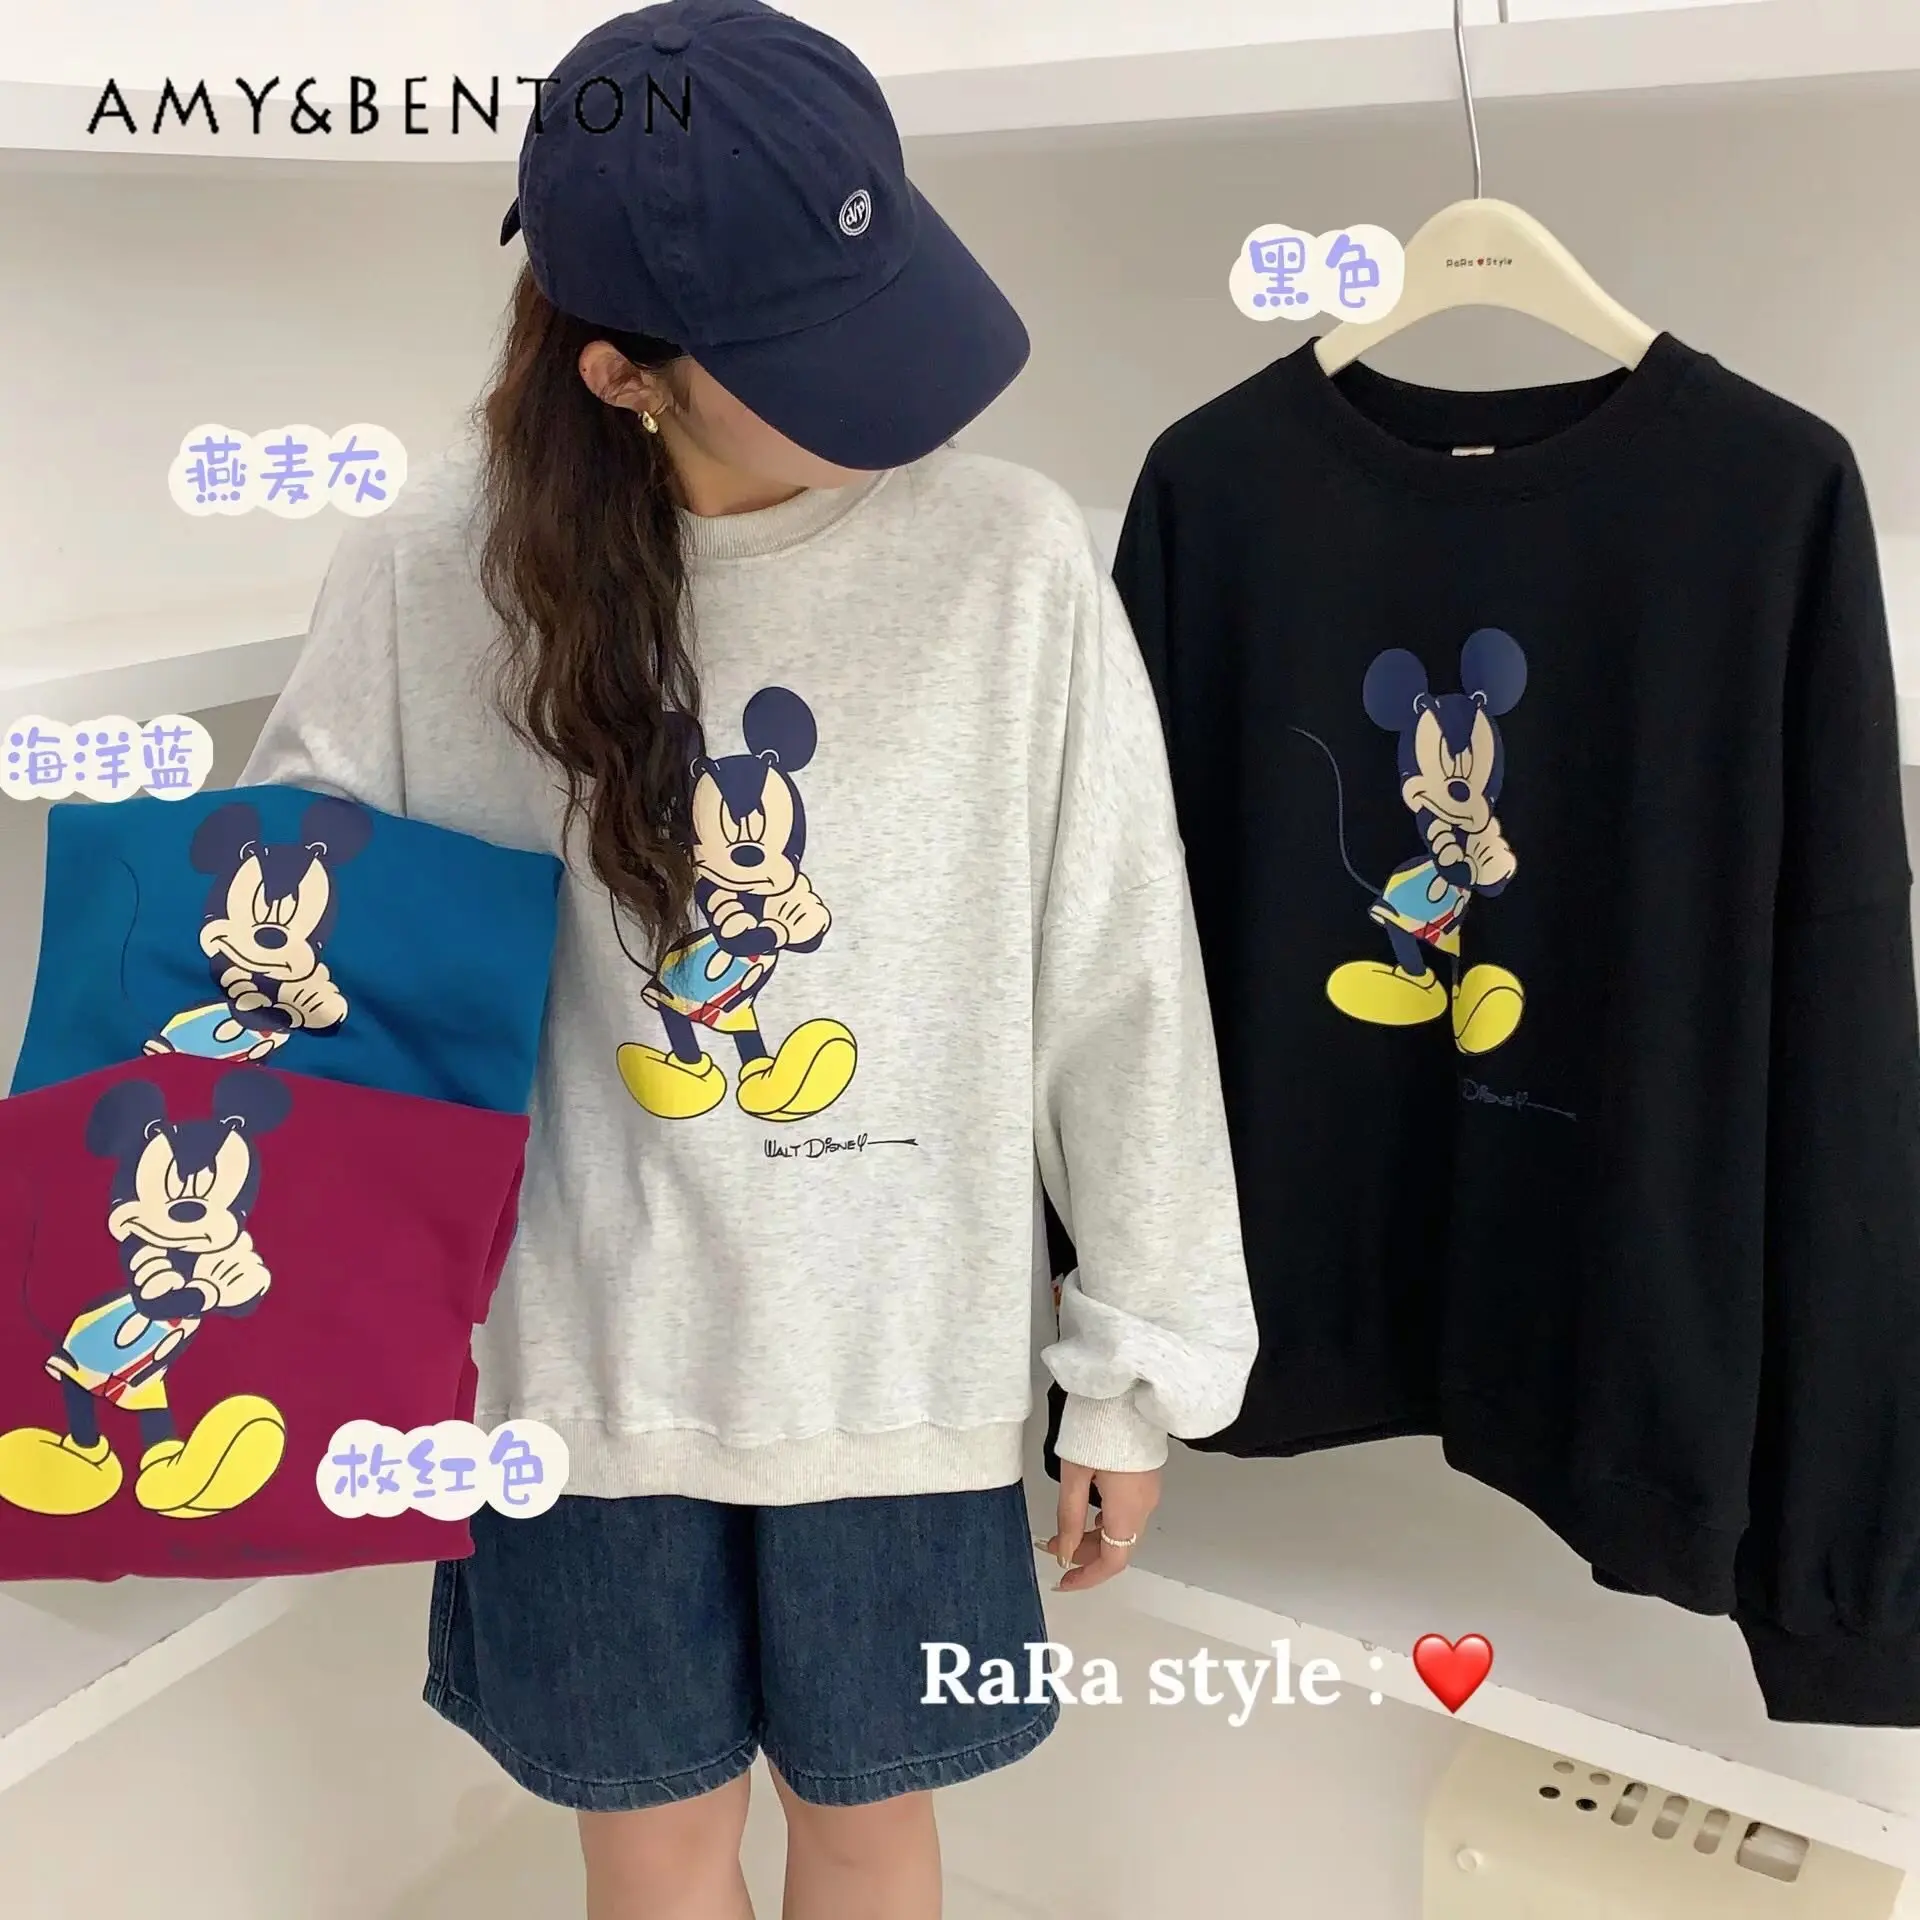 Autumn Loose Slimming and Simple All-Match Cartoon Printed Pullover Tops Ladies Funky Casual Round Neck Sweatshirt for Women